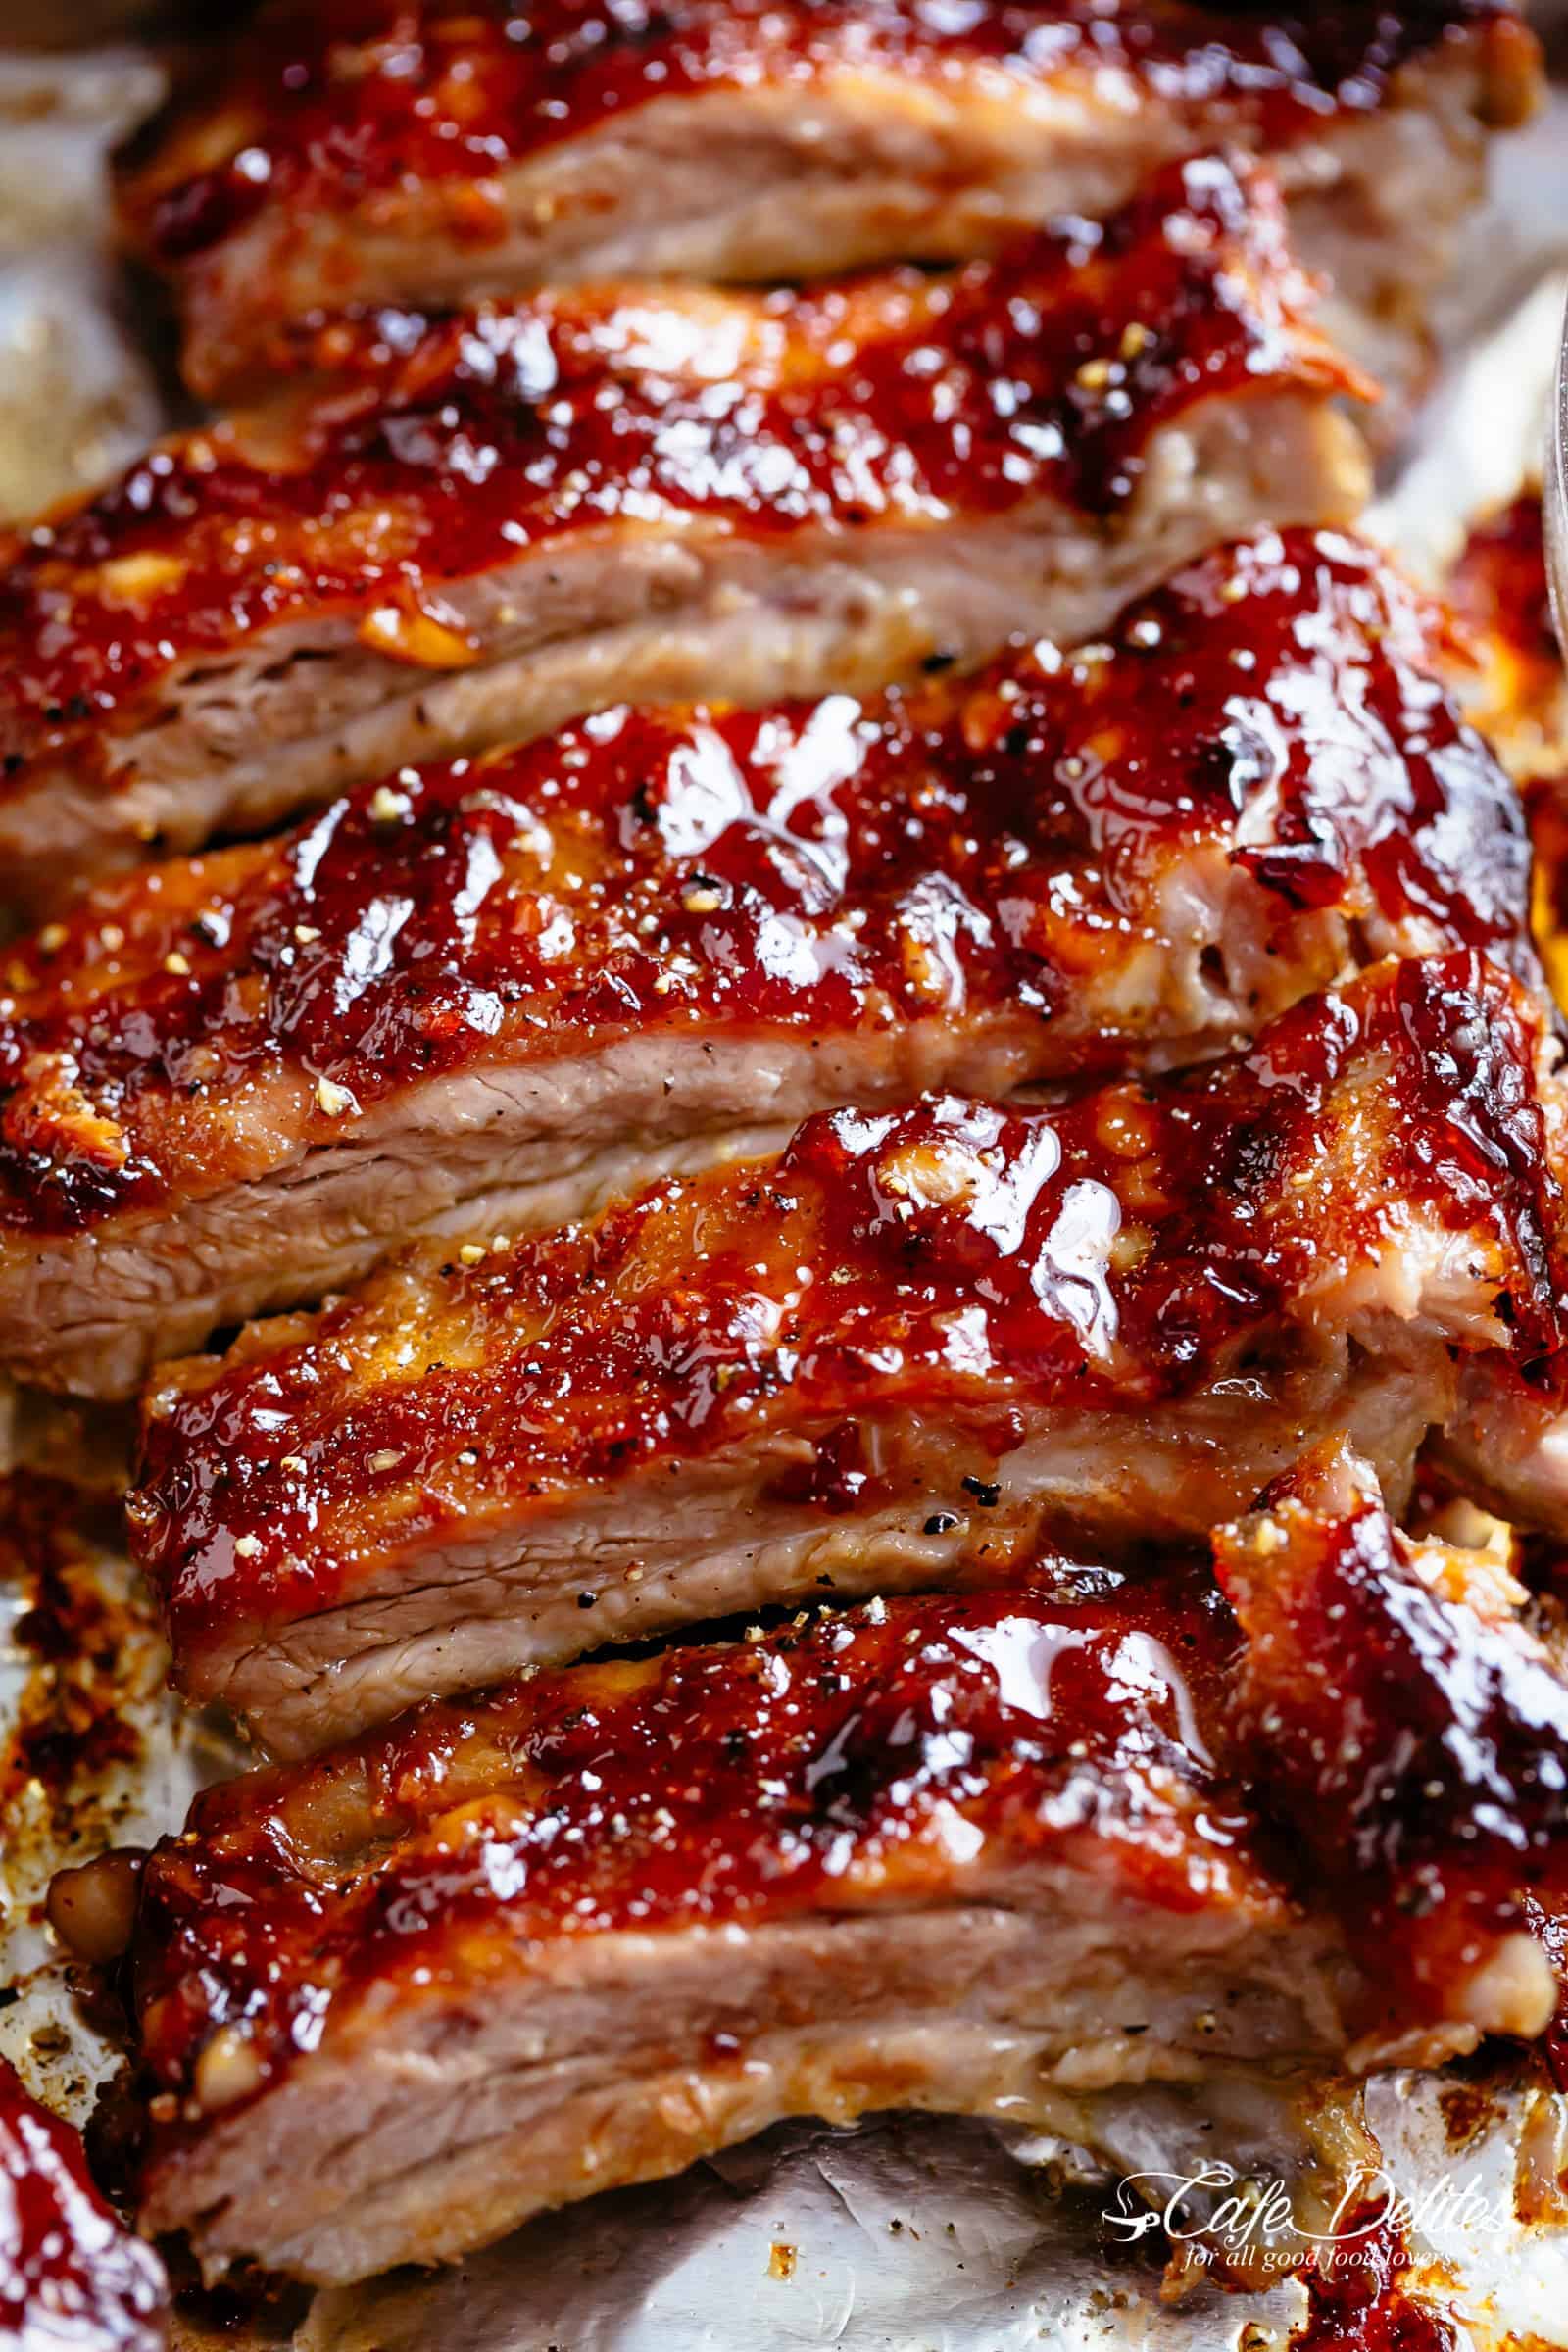 Oven Barbecue Ribs slathered in the most delicious sticky barbecue sauce with a kick of garlic and optional heat! Juicy melt-in-your-mouth oven baked Barbecue Pork Ribs are fall-off-the-bone delicious! Double up on incredible flavour with an easy to make dry rub first, then coat them in a seasoned barbecue sauce mixture so addictive you won't stop at one! Finger licking good ribs right here! | cafedelites.com